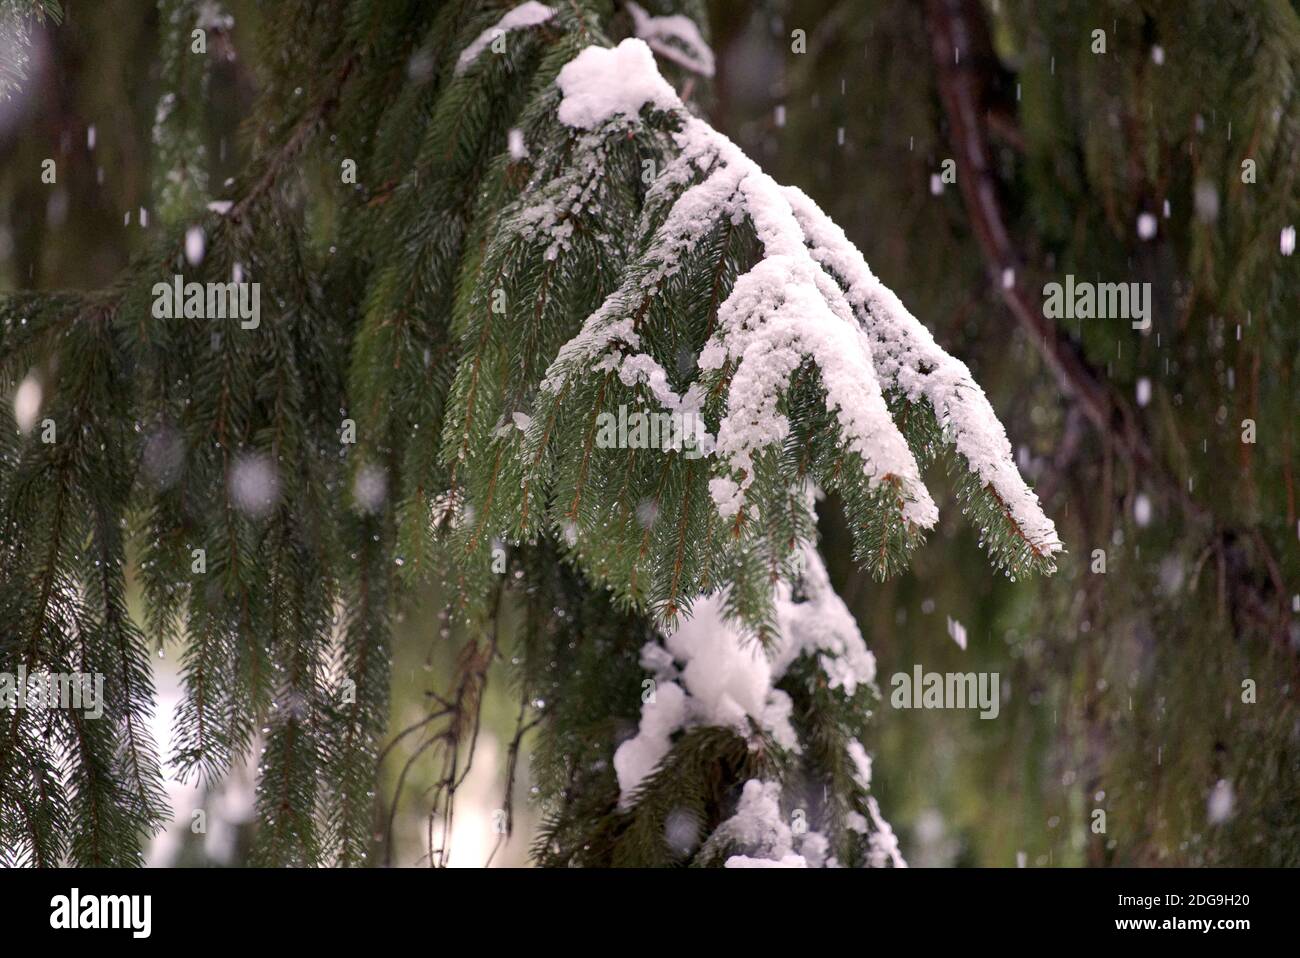 Heavy wet snow covering leafs of a pine tree. It snows. Stock Photo